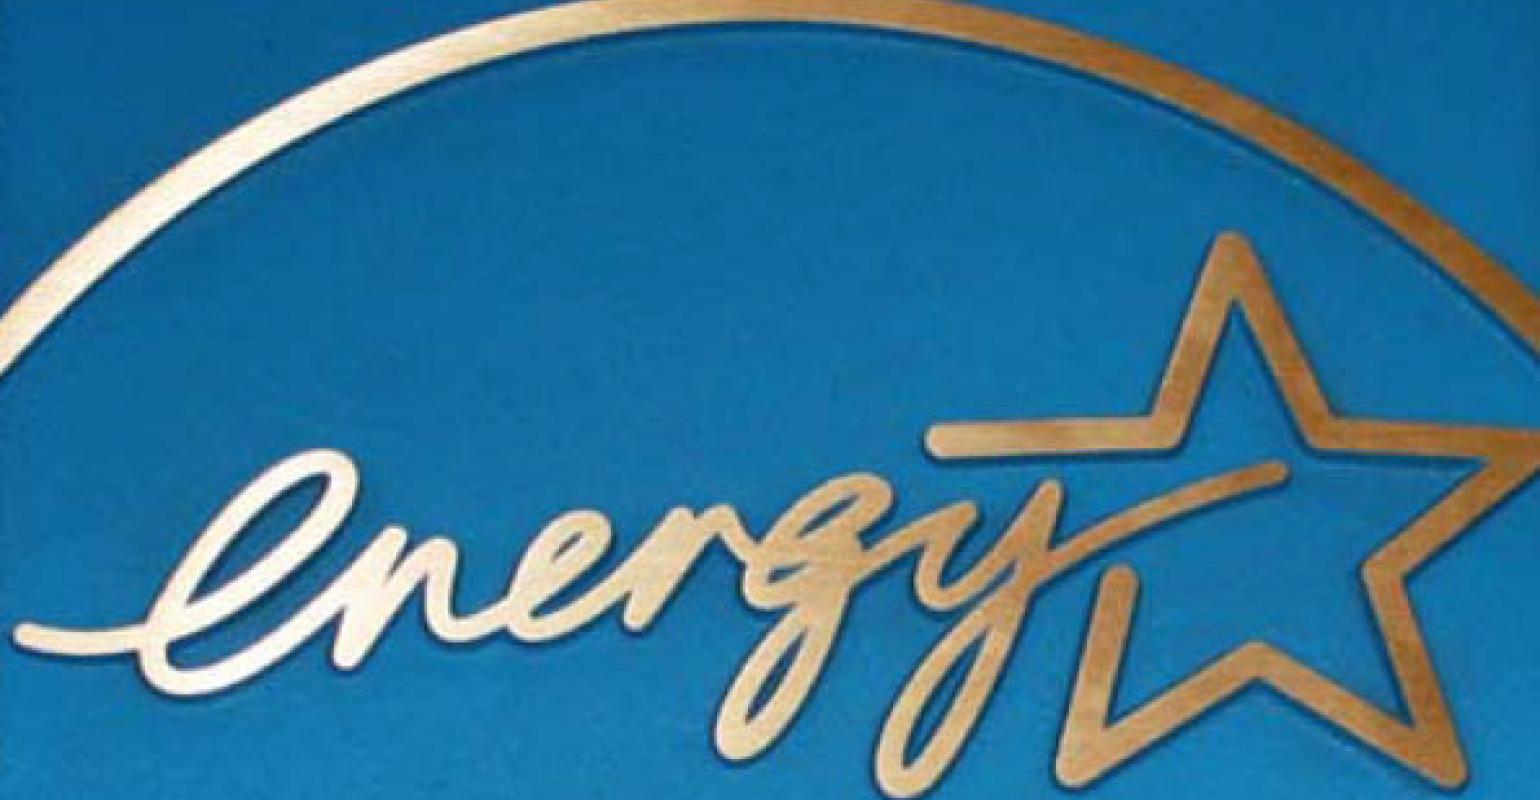 EPA’s Energy Star Program Now Helps Commercial Building Owners Track